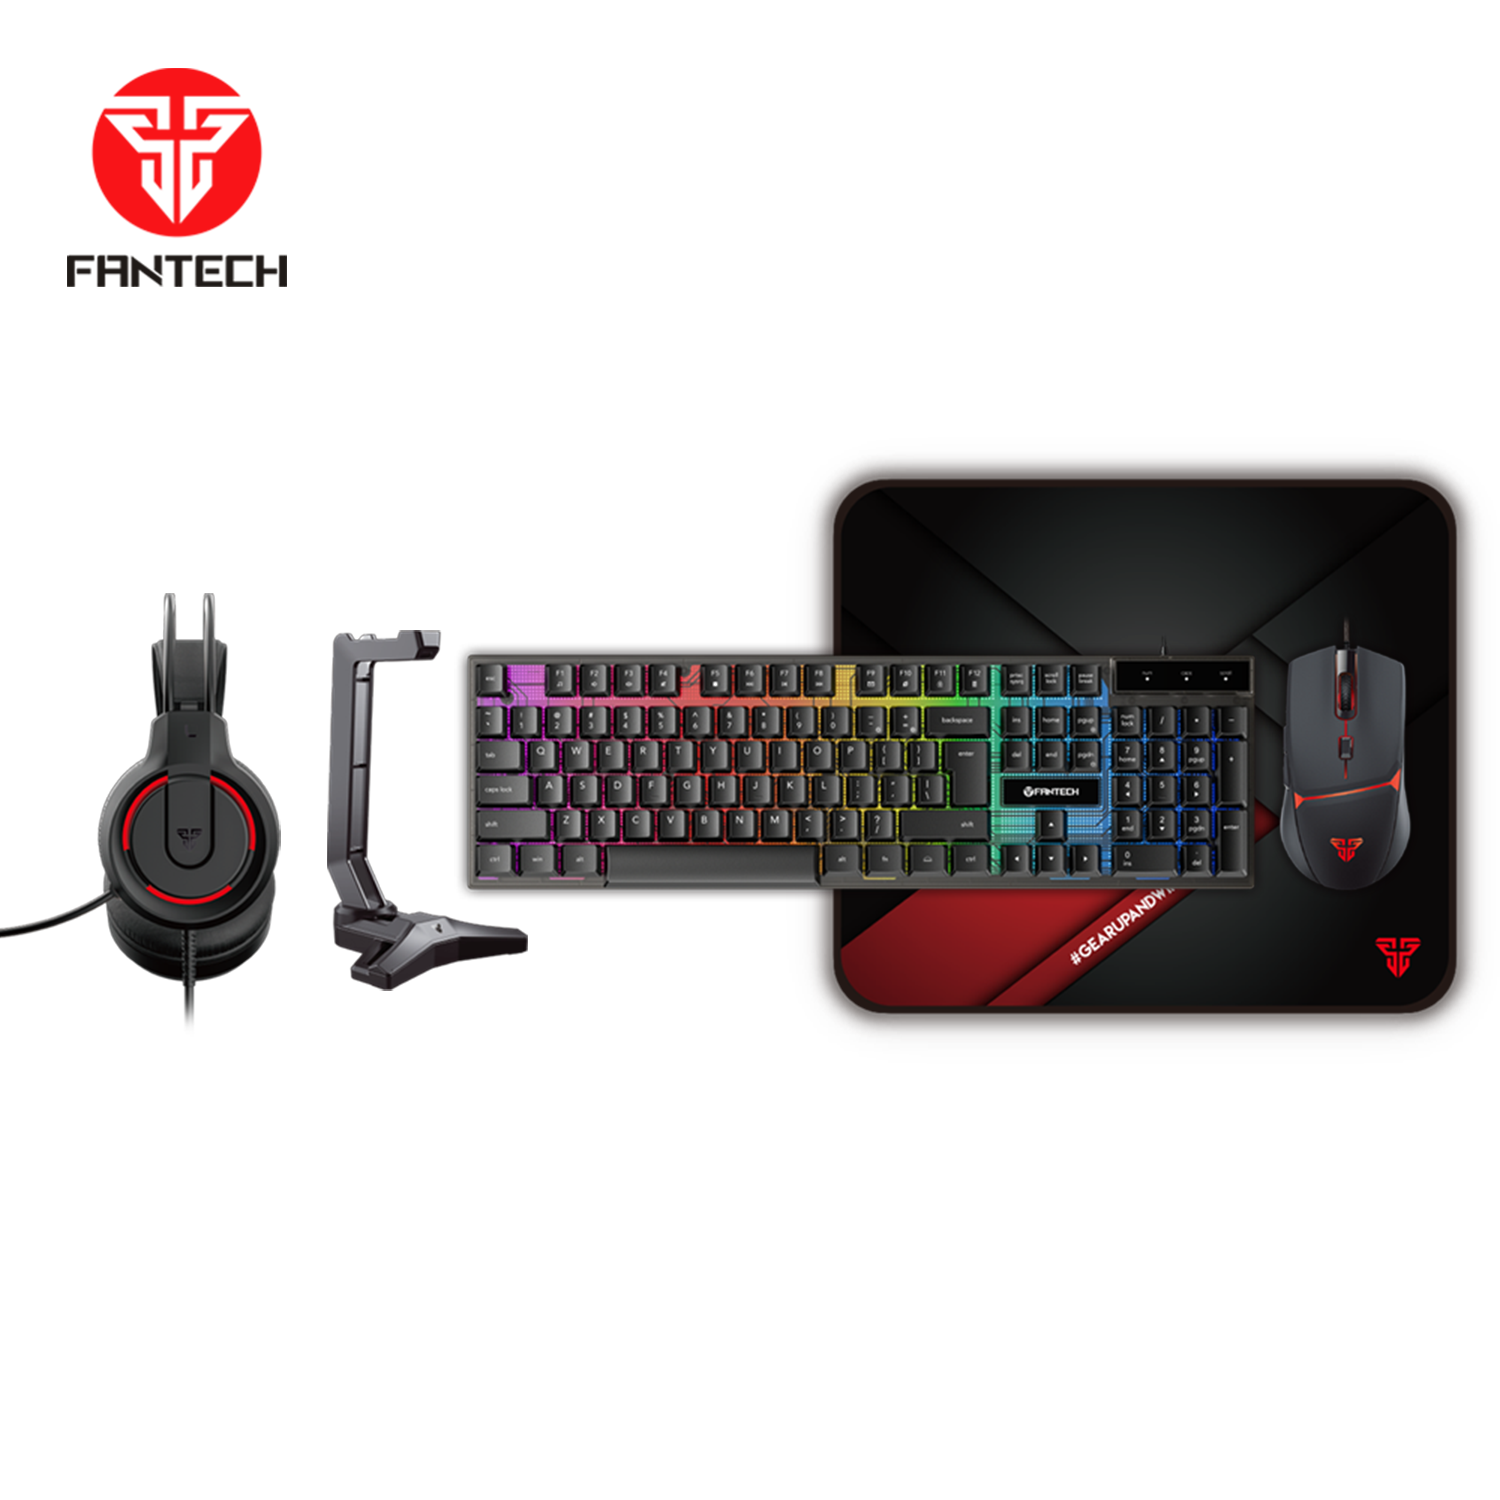 FANTECH P51 Power Bundle Gaming Keyboard and Mouse JOD 30